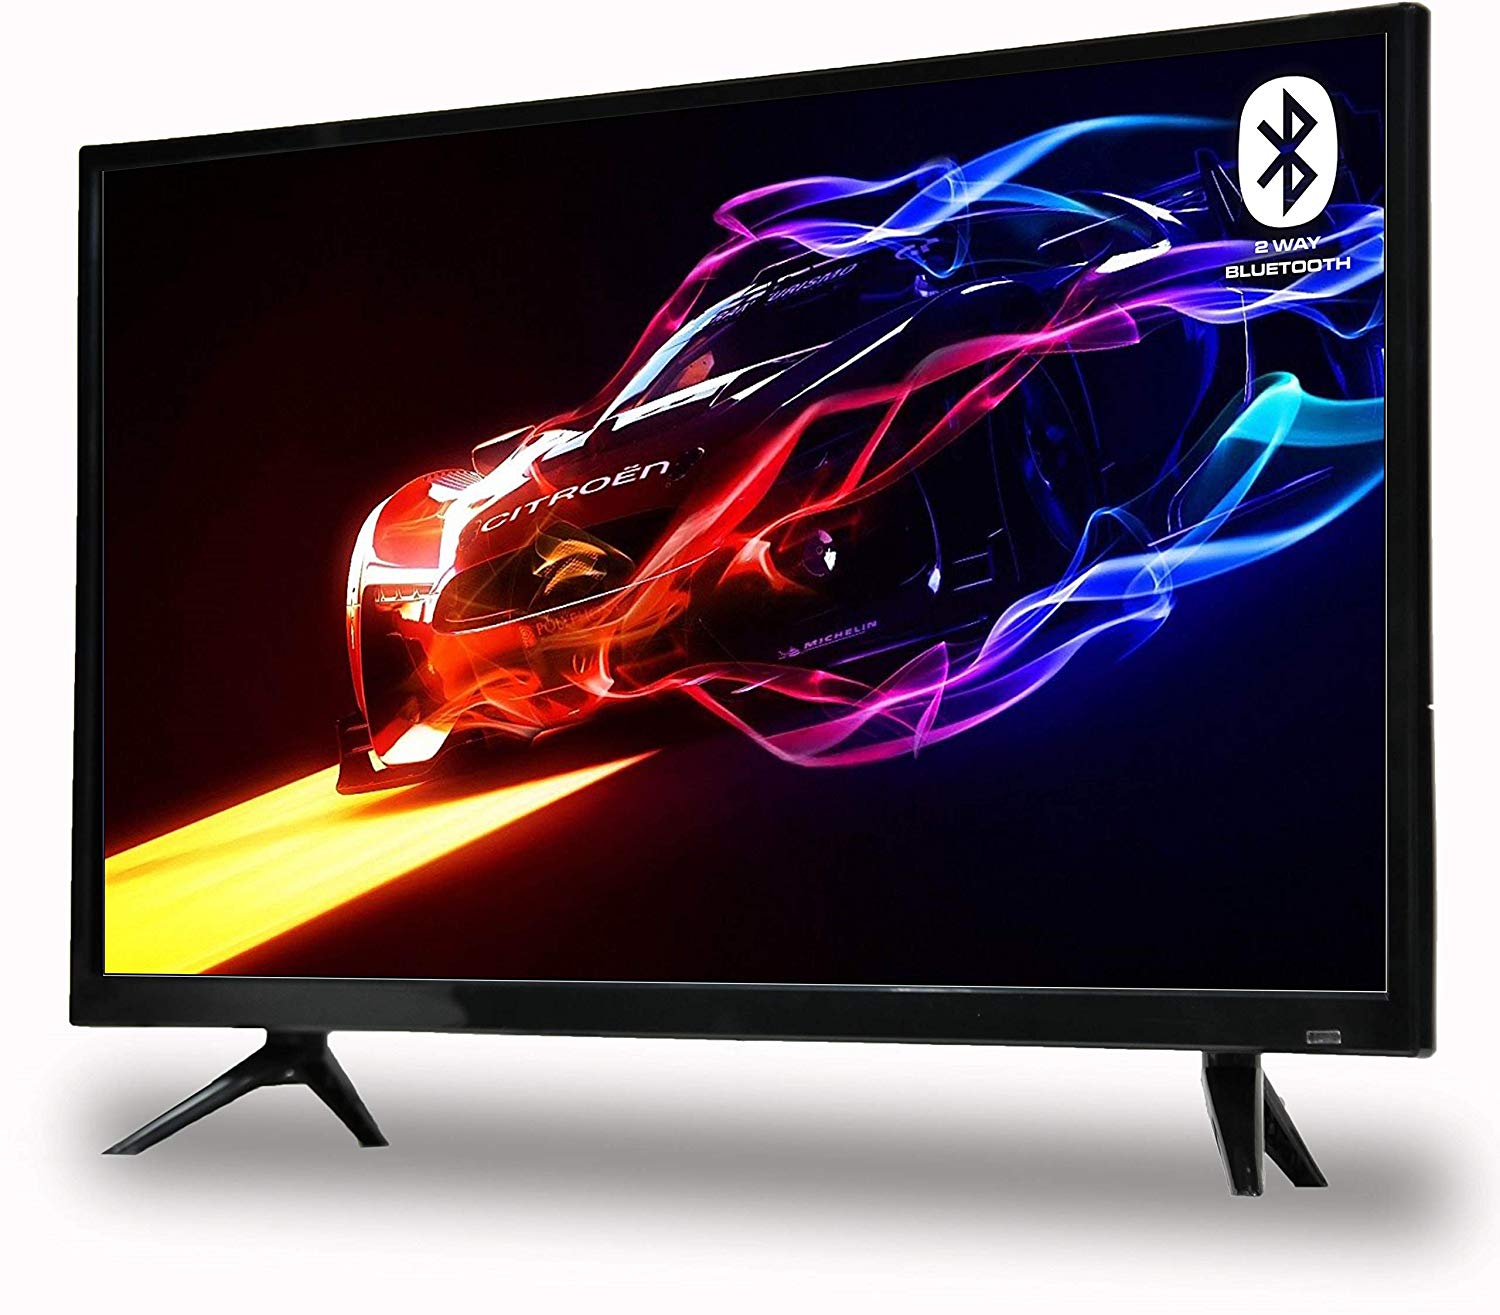 Fortex 32 inches HD Ready IPS LED TV